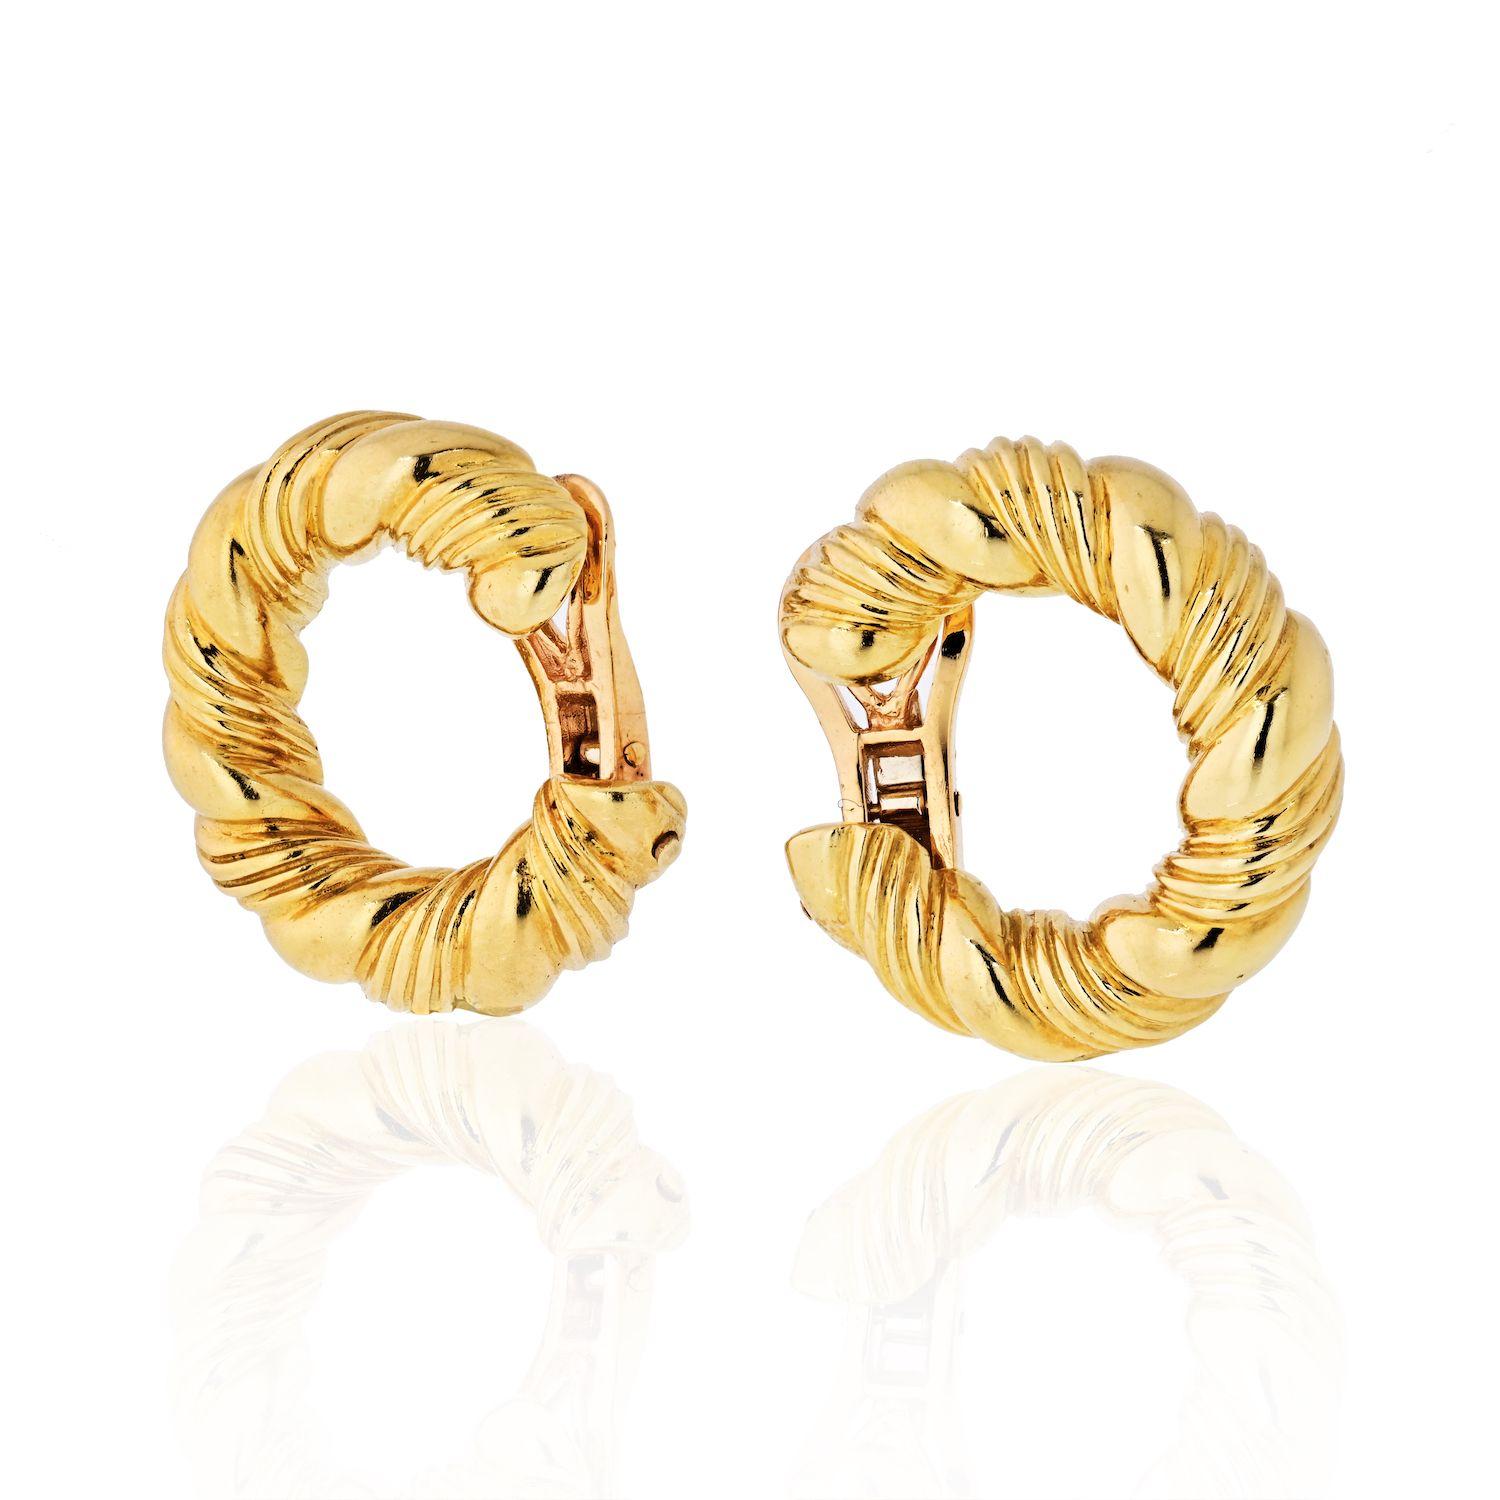 These earrings will be sure to make you feel glamorous, like Sofia Loren, vacationing on the Amalfi Coast. Very elegant twisted hoop earrings in 18k yellow gold, signed Van Cleef & Arpels. Circa 1970.
Fashionable and with braided style, these